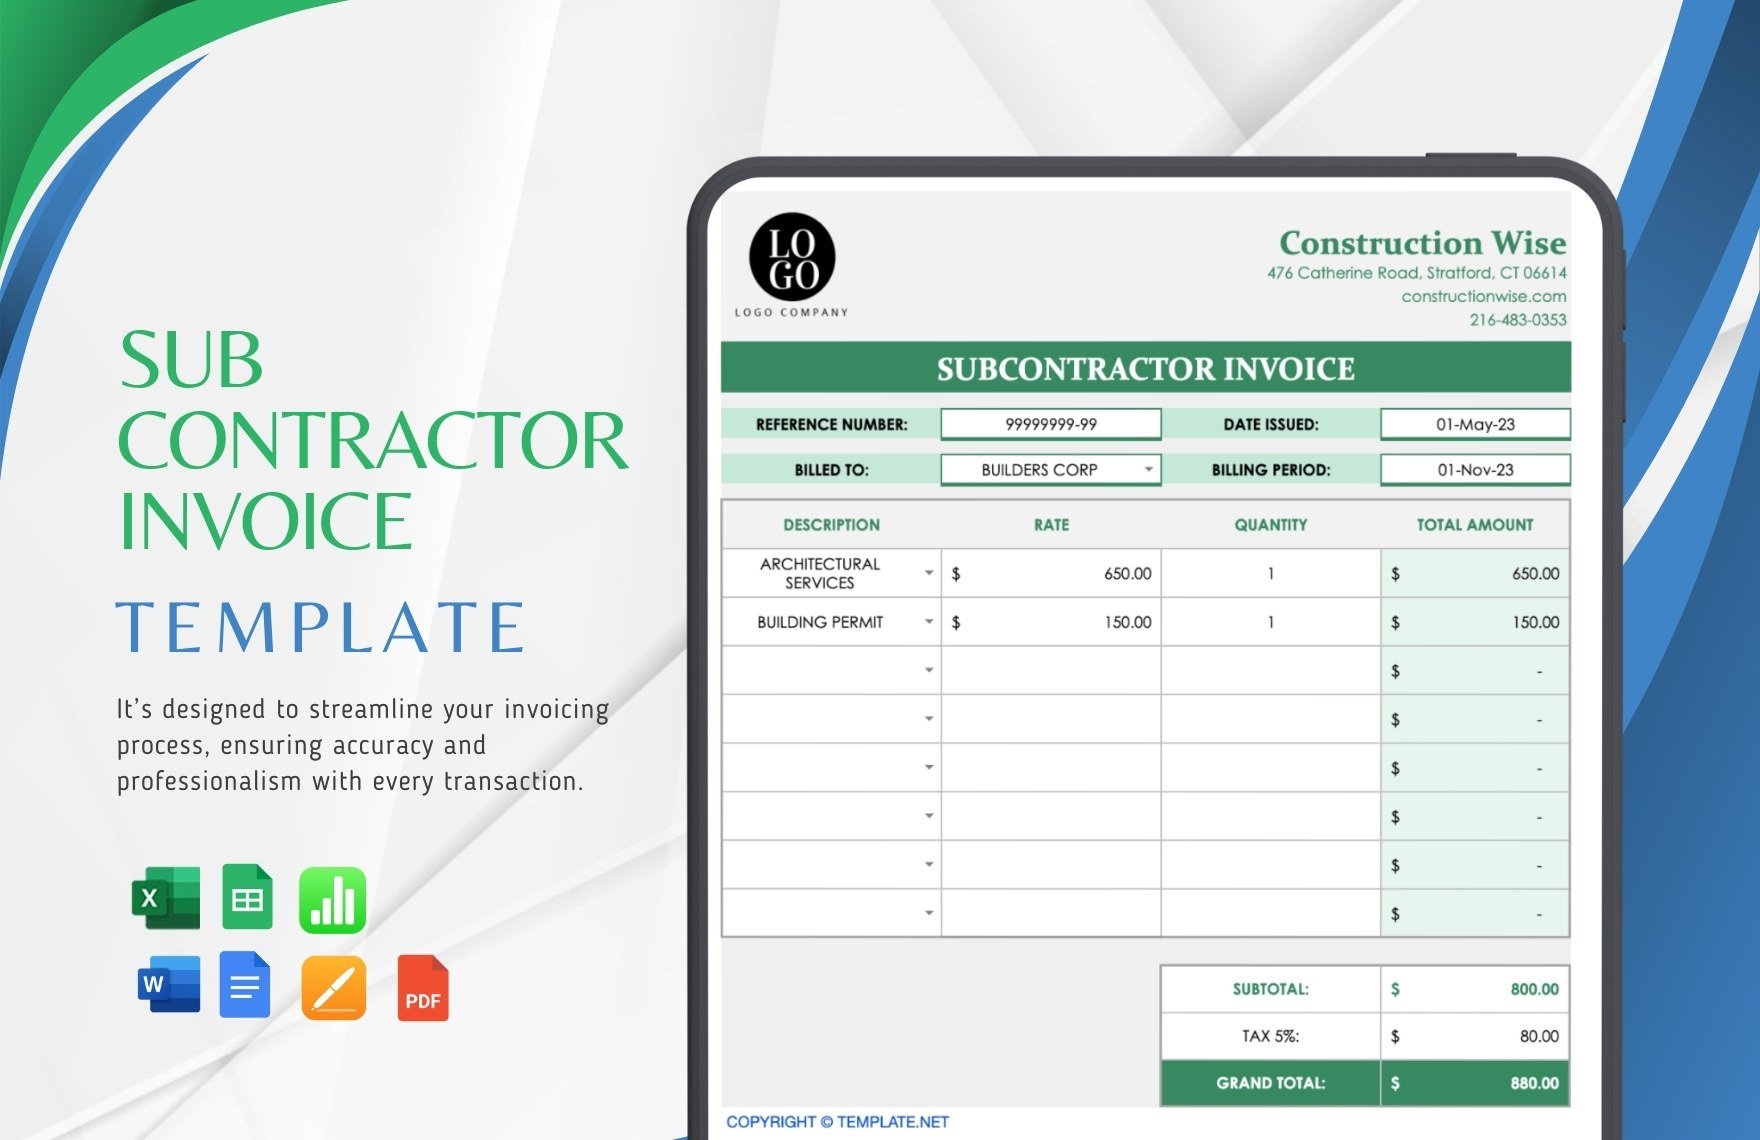 Subcontractor Invoice Template in Word, Google Docs, Excel, PDF, Google Sheets, Apple Pages, Apple Numbers